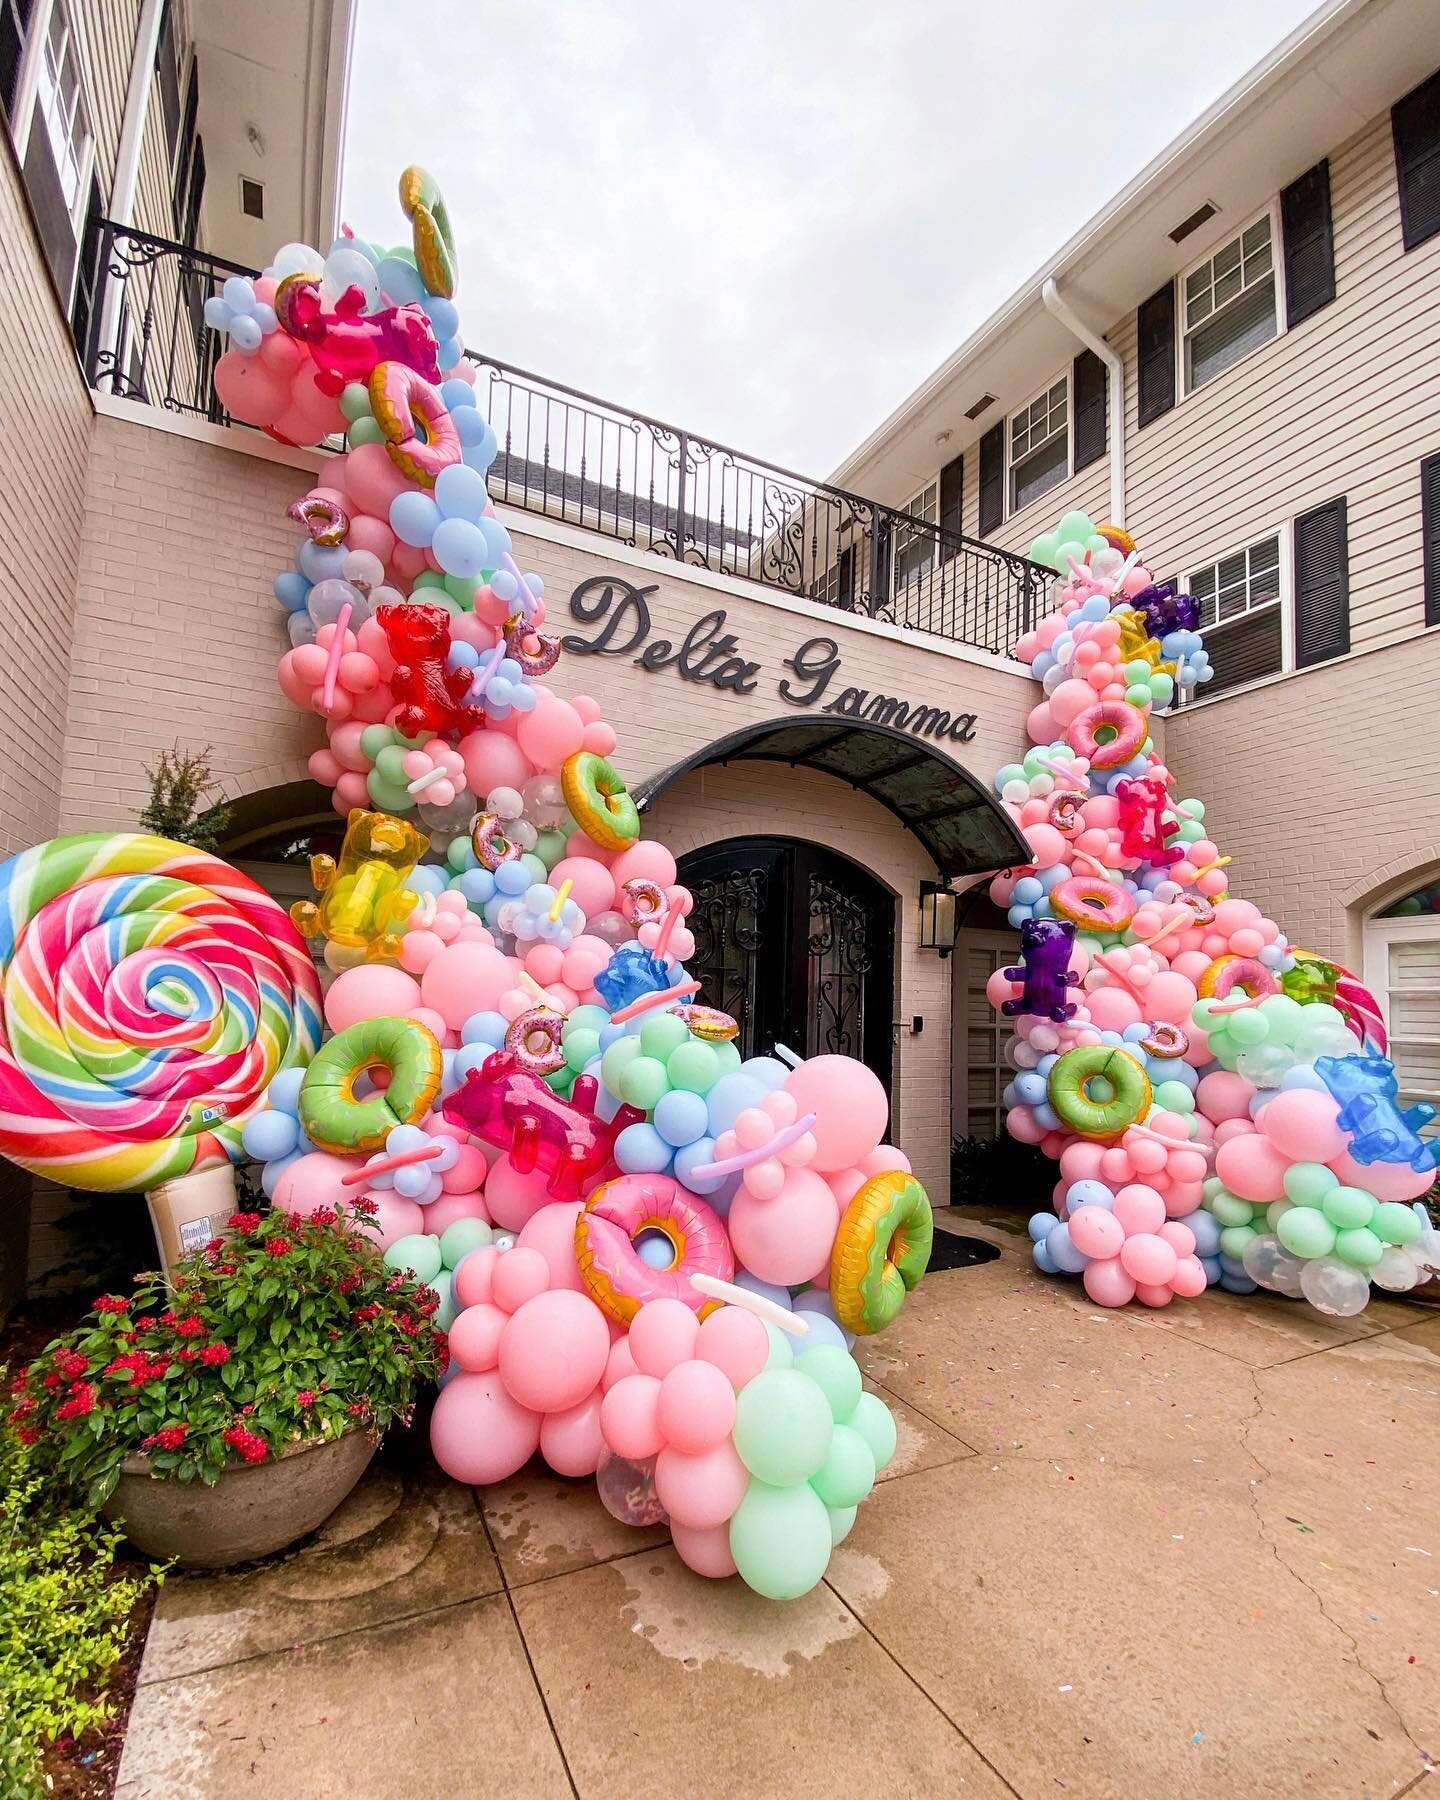 I want candy 🍭🍬🍩

The sweetest install for @oudeltagamma bid day! 💕💕